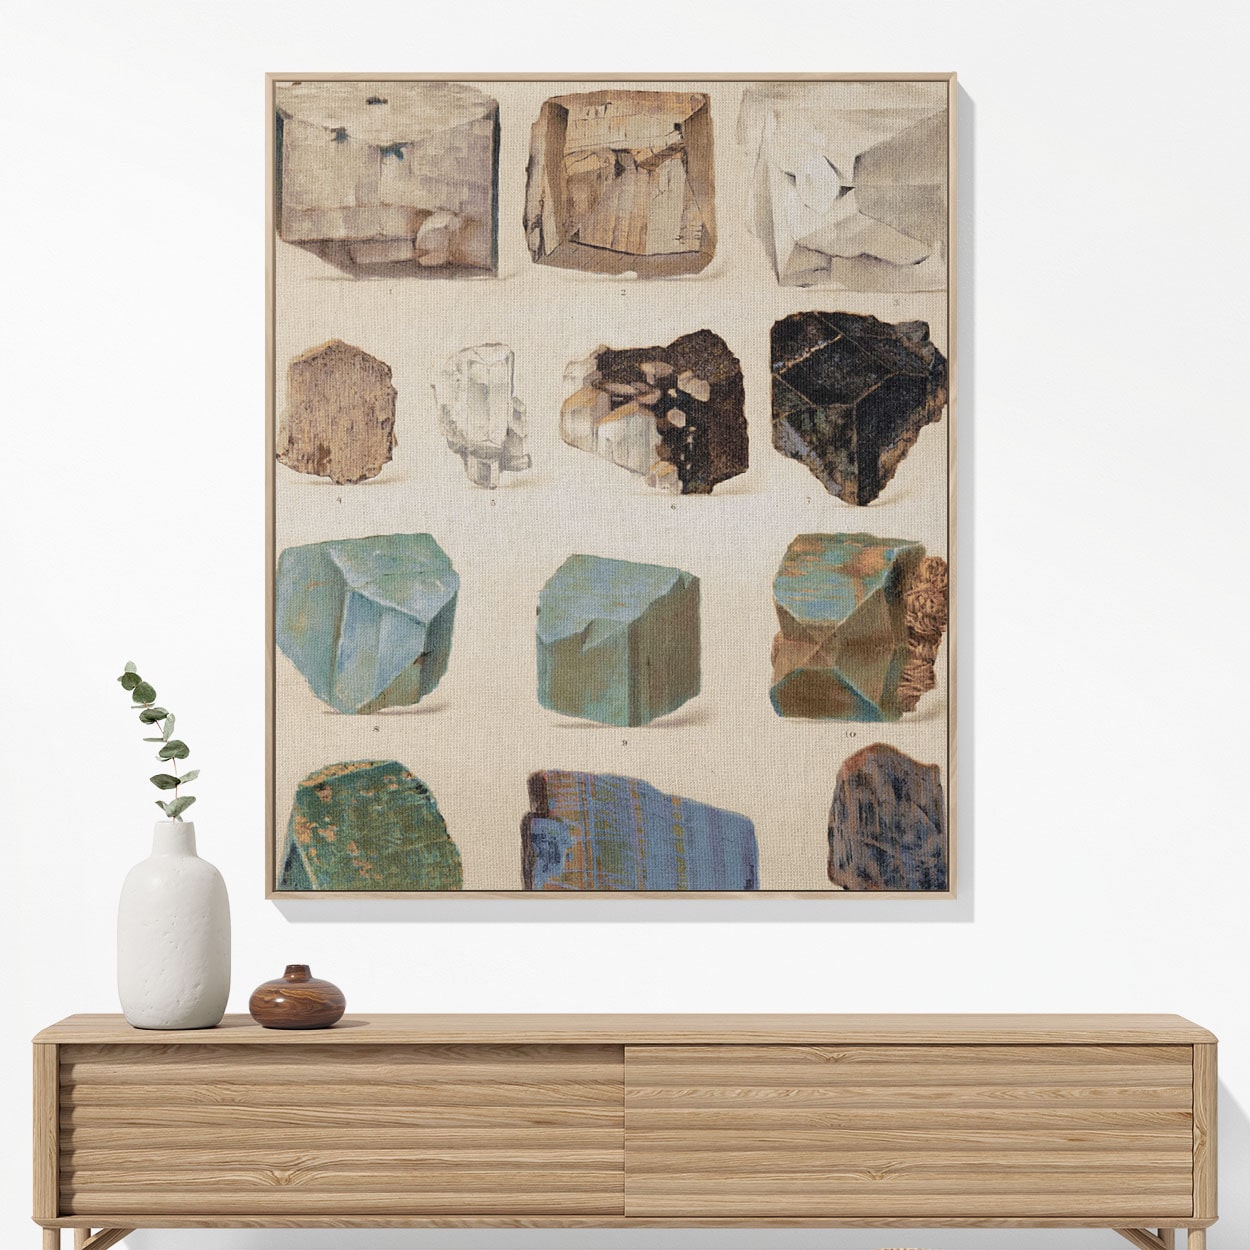 Raw Crystals and Gemstones Woven Blanket Woven Blanket Hanging on a Wall as Framed Wall Art